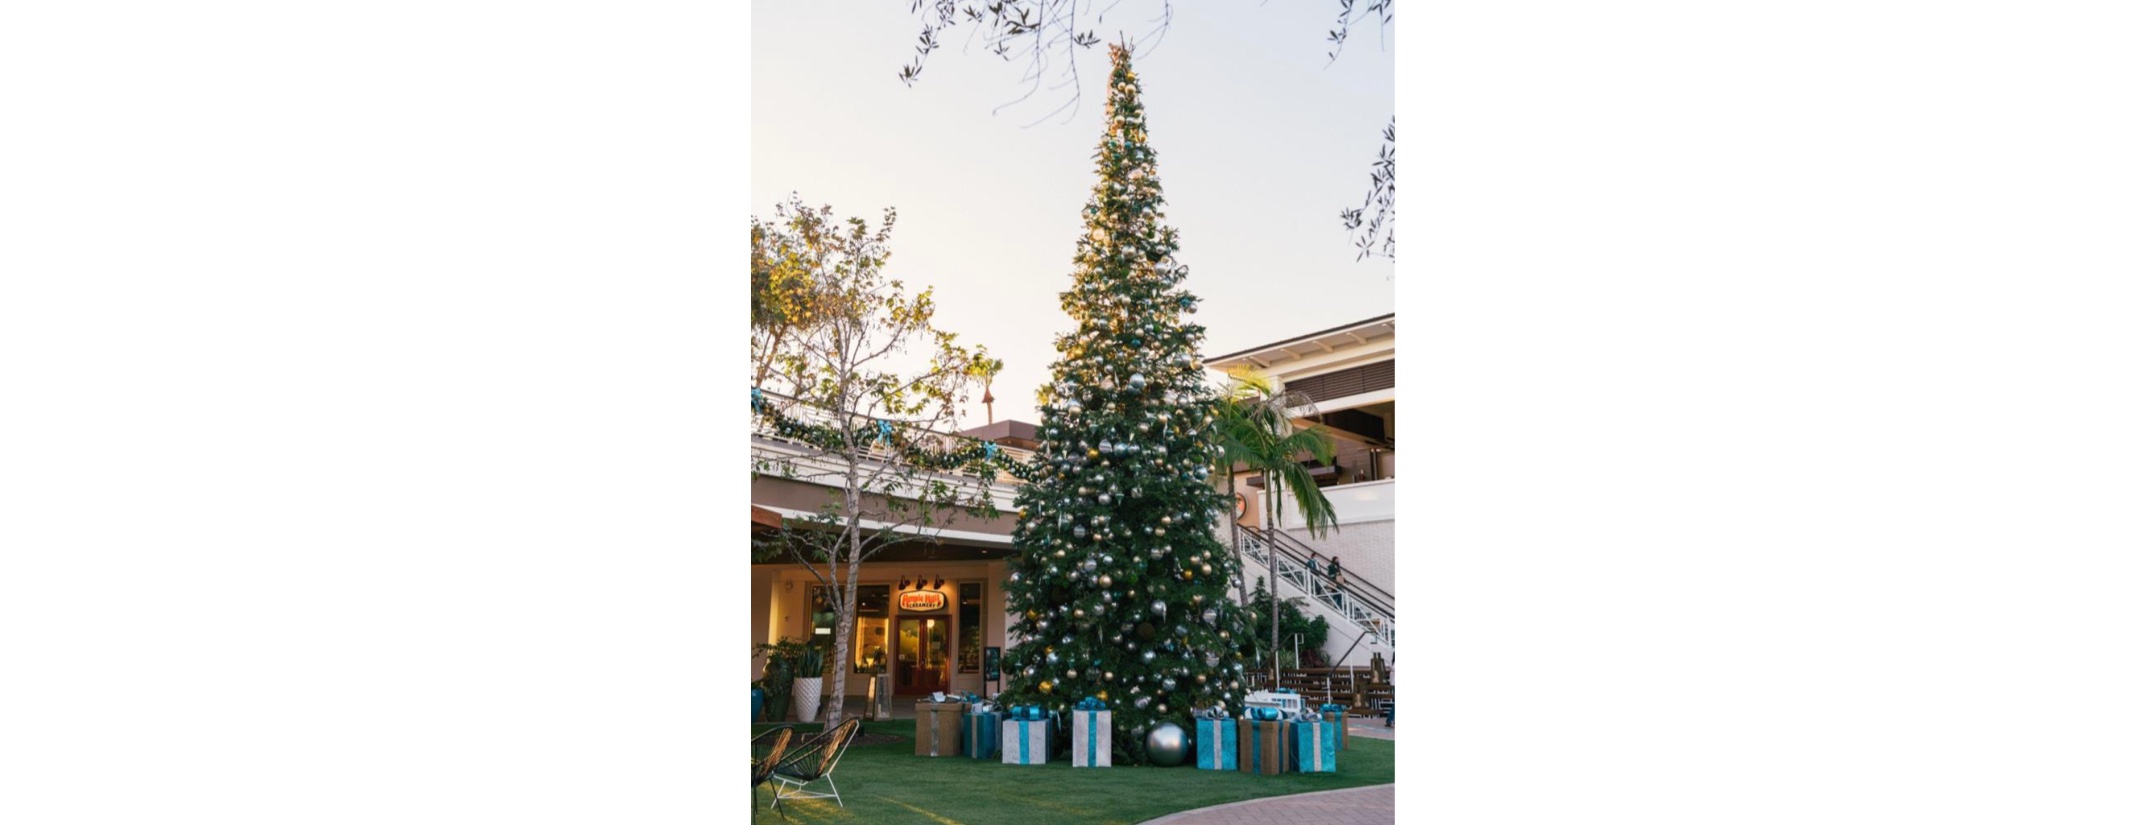 Experience the Magic of the Season with Full Schedule of Holiday Events at 2ND & PCH